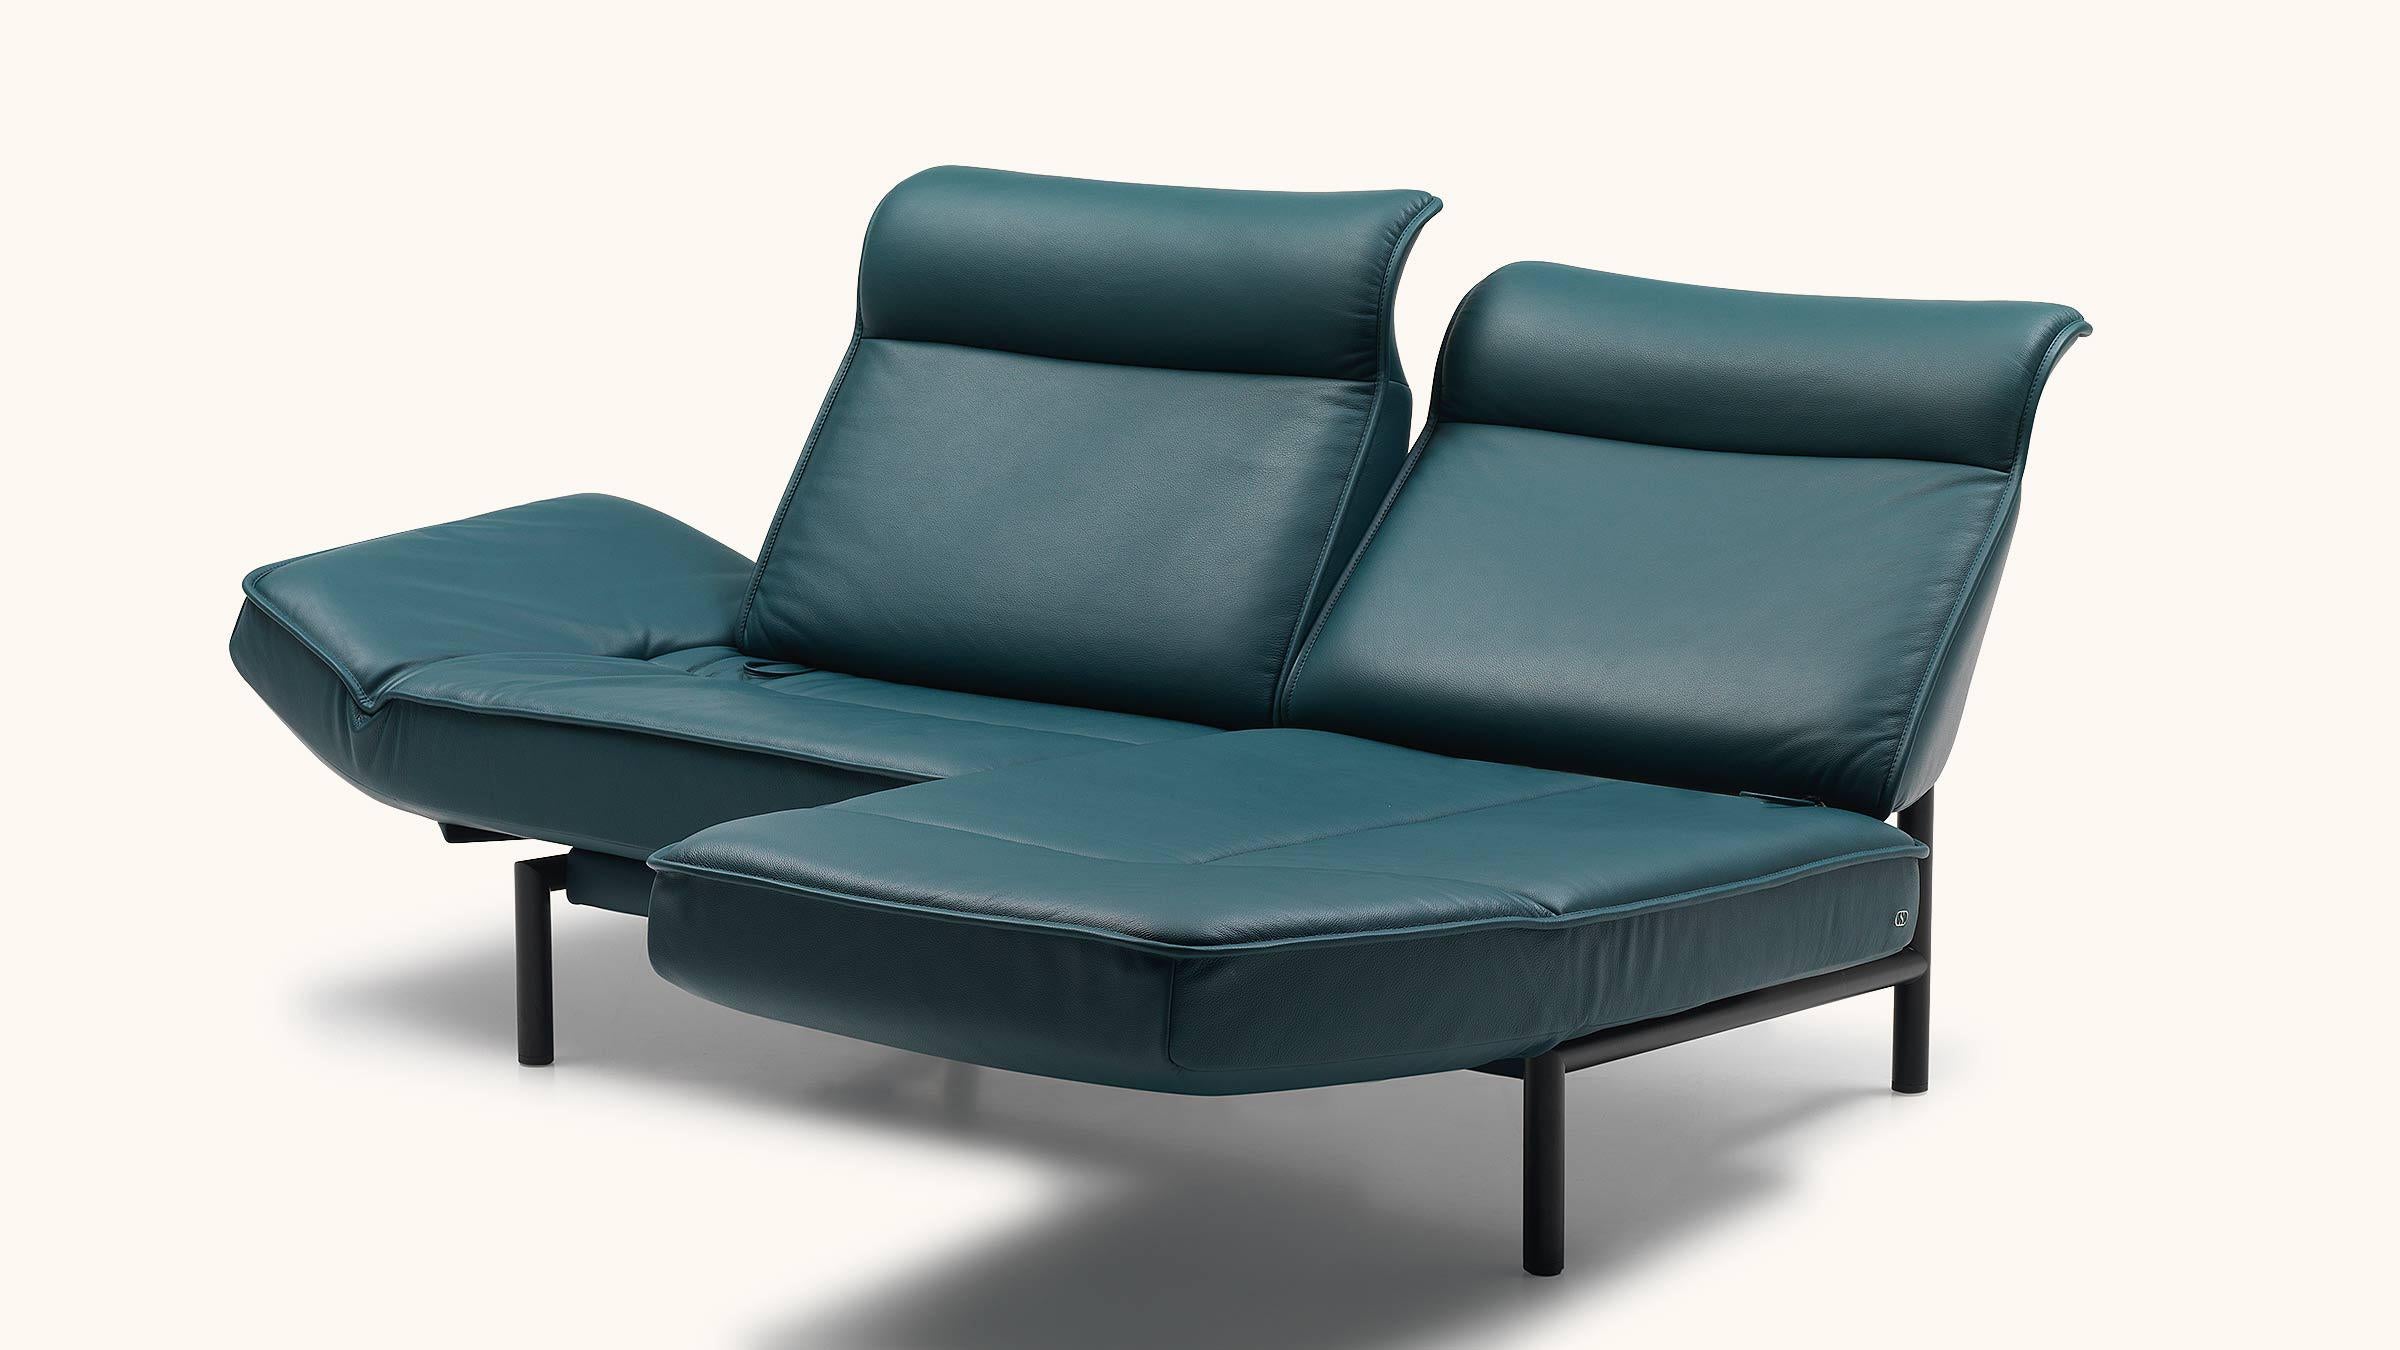 Swiss De Sede DS-450/02 Sofa in Petrol Upholstery by Thomas Althaus For Sale